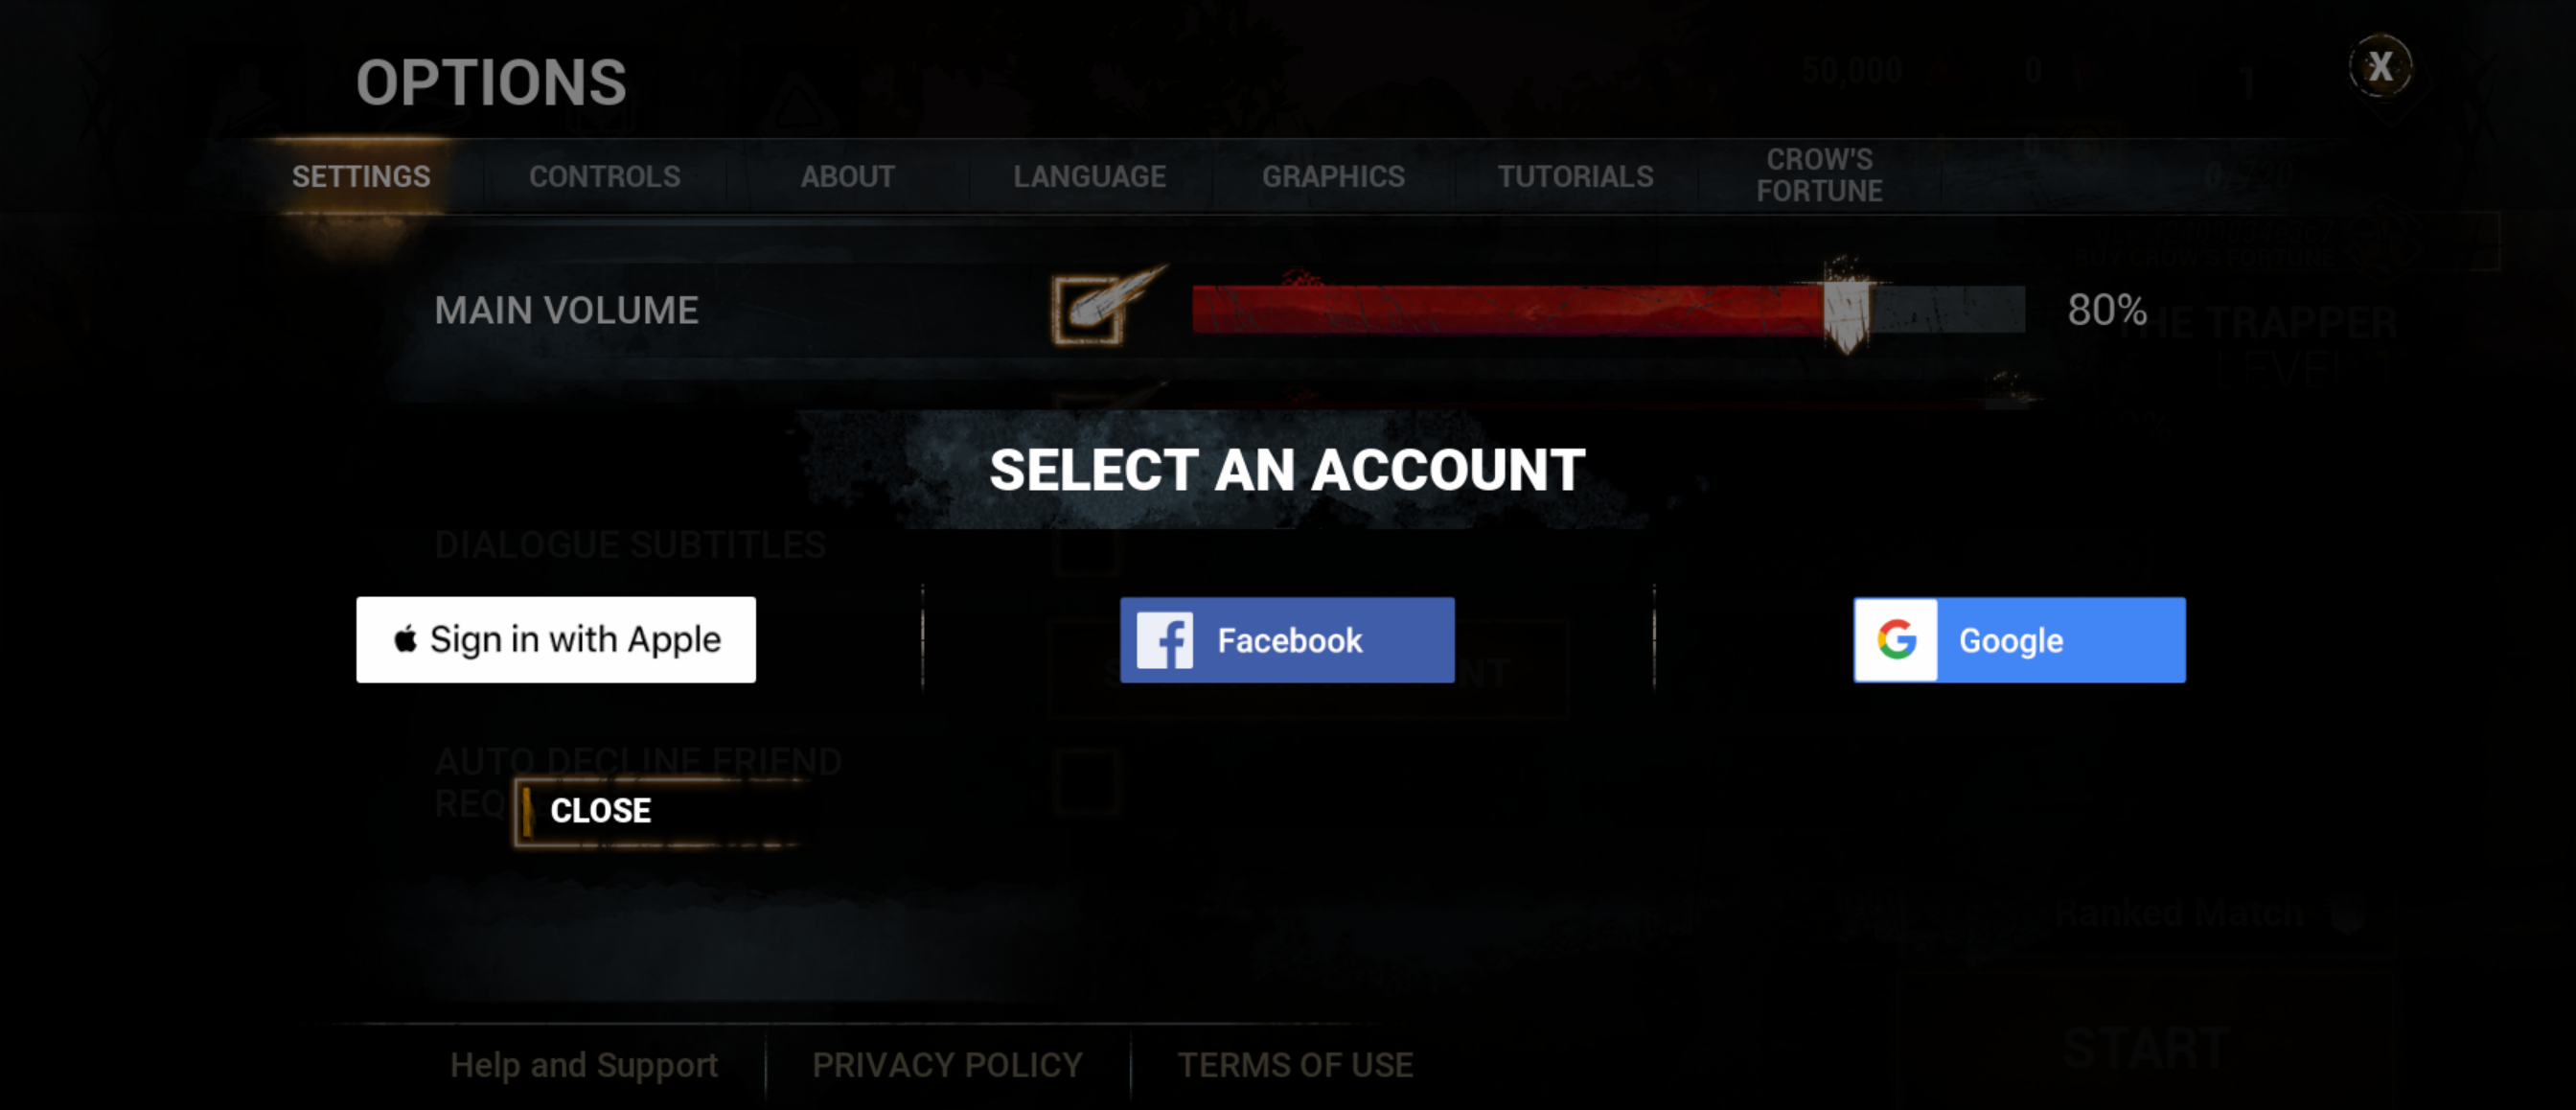 How to link your accounts in Dead by Daylight